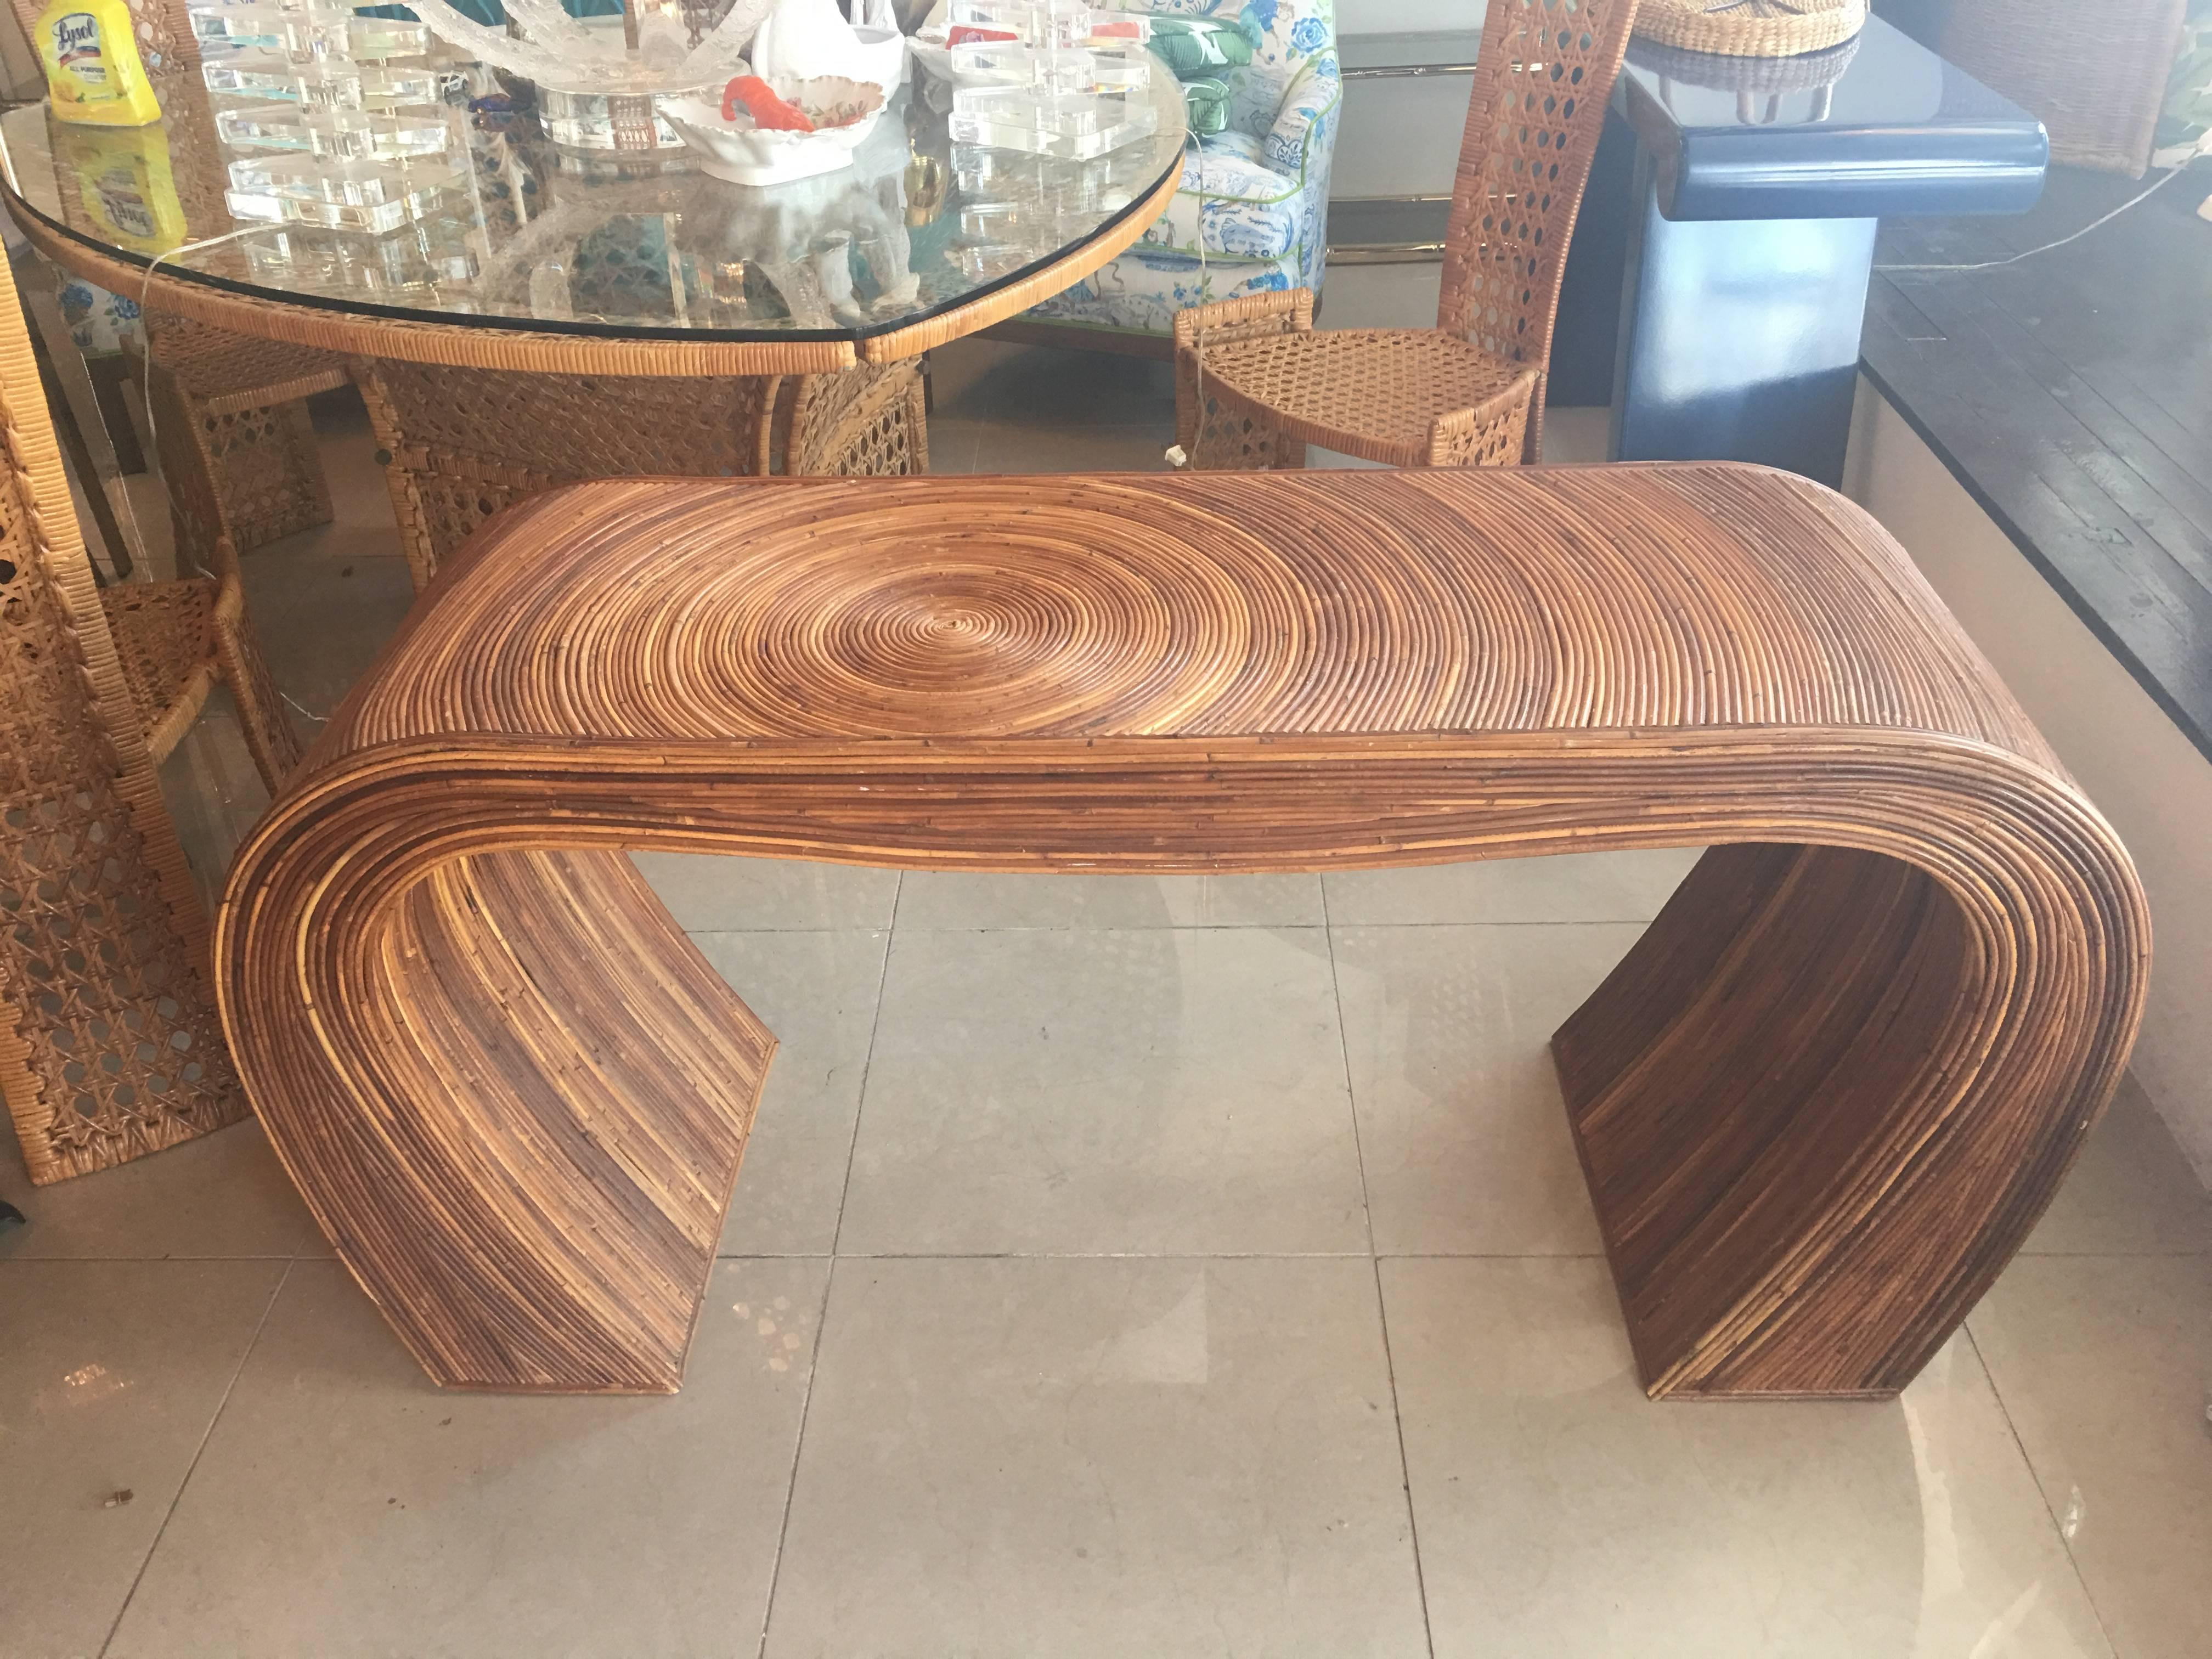 Vintage pencil reed bamboo console table in the manner of Gabriella Crespi. Great tropical palm beach piece!